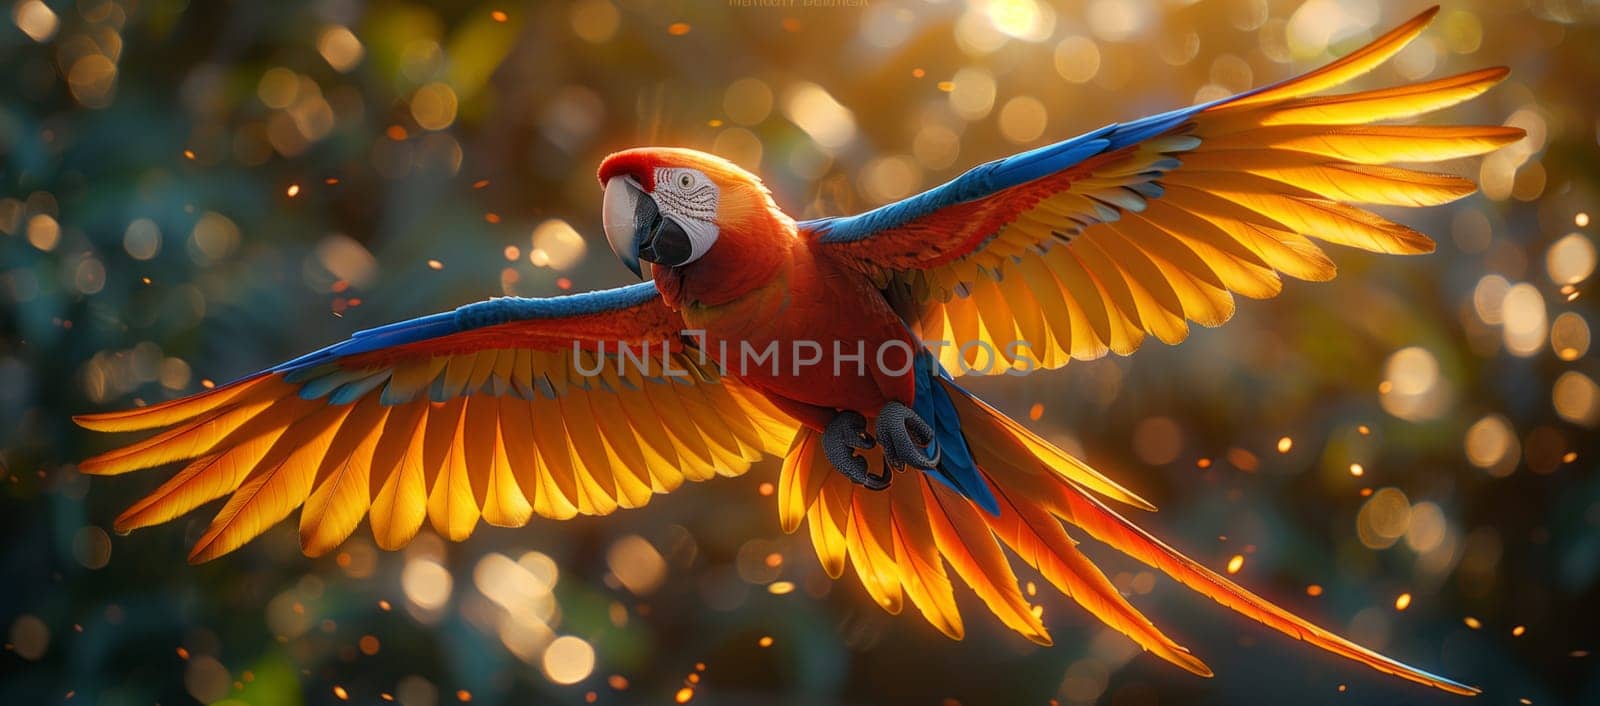 A vibrant electric blue parrot, with colorful feathers, is soaring through the sky with its wings spread wide, resembling a bird of prey